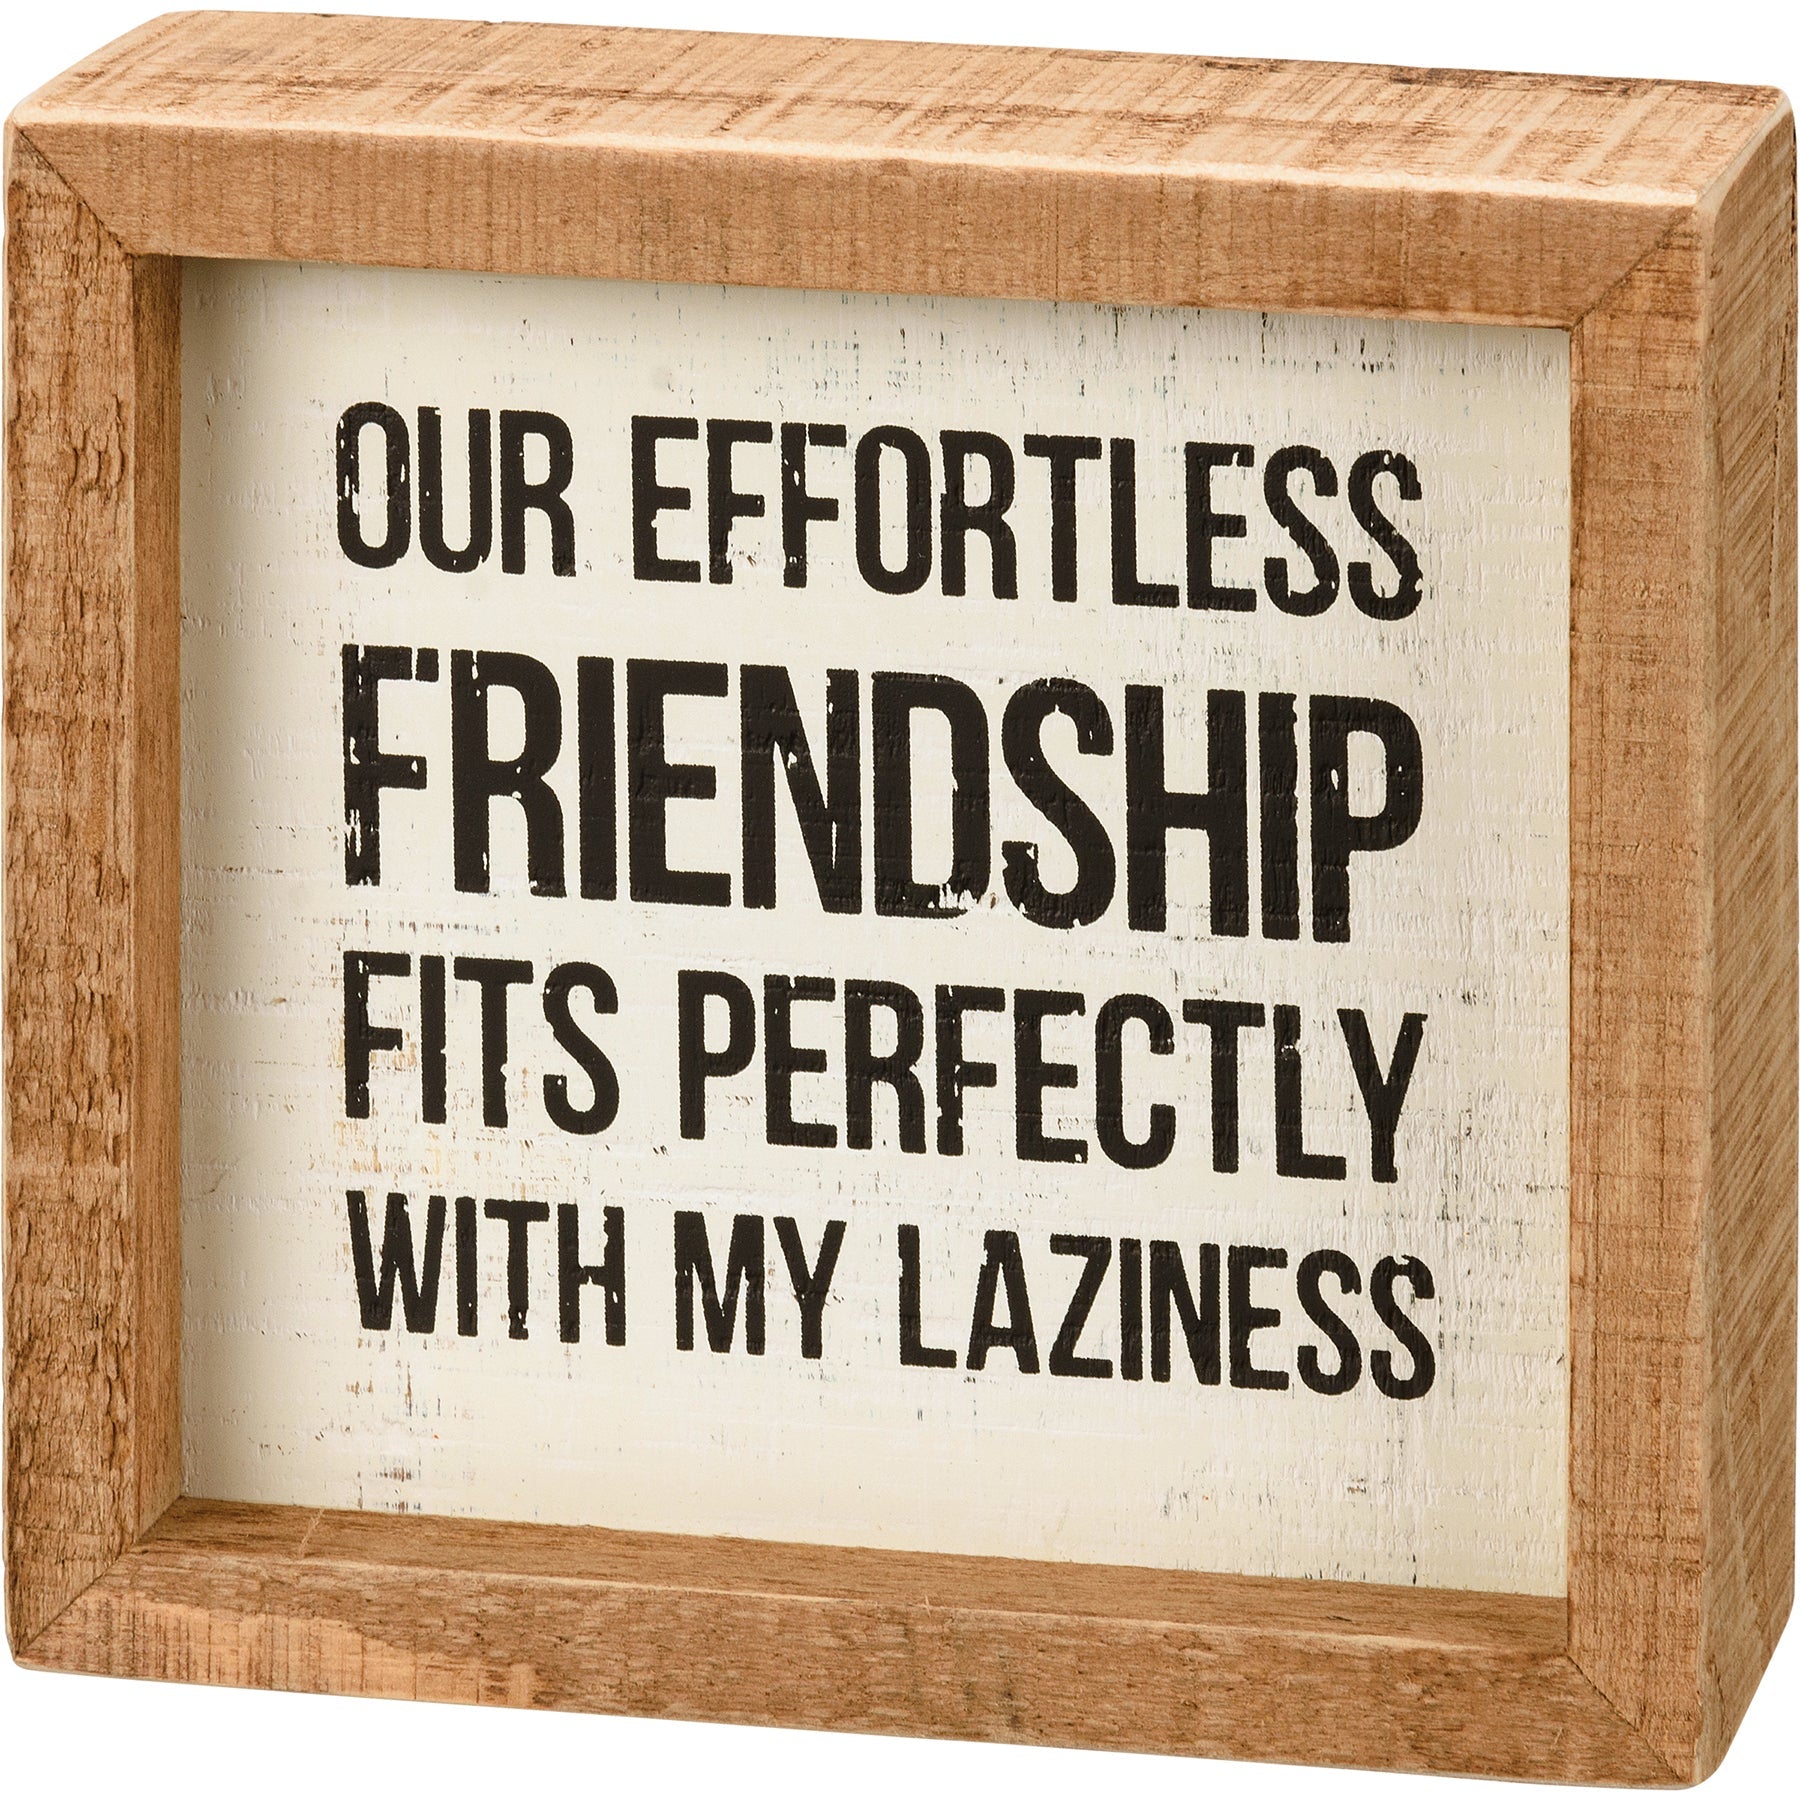 Our Effortless Friendship Fits Perfectly Wooden Inset Box Sign | Rustic Farmhouse